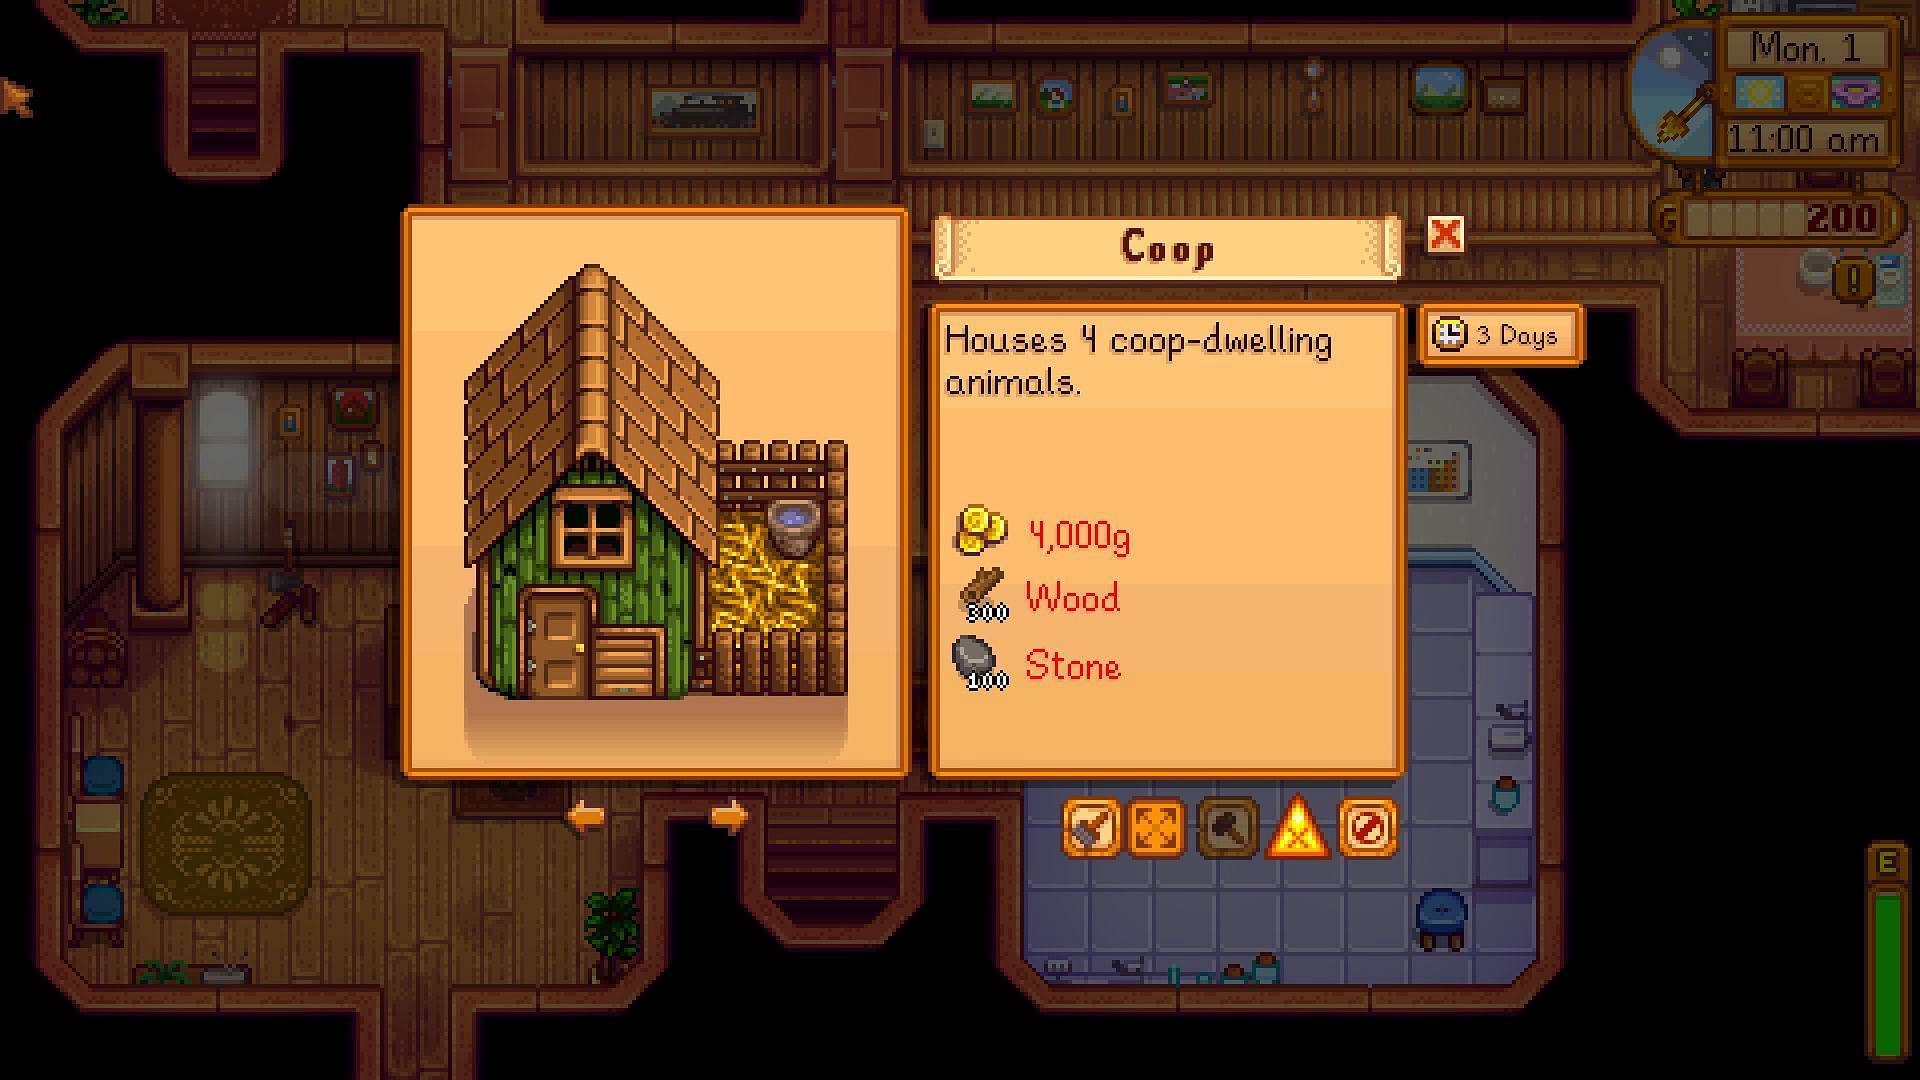 The first Coop costs 4000g to build (Image via ConcernedApe)